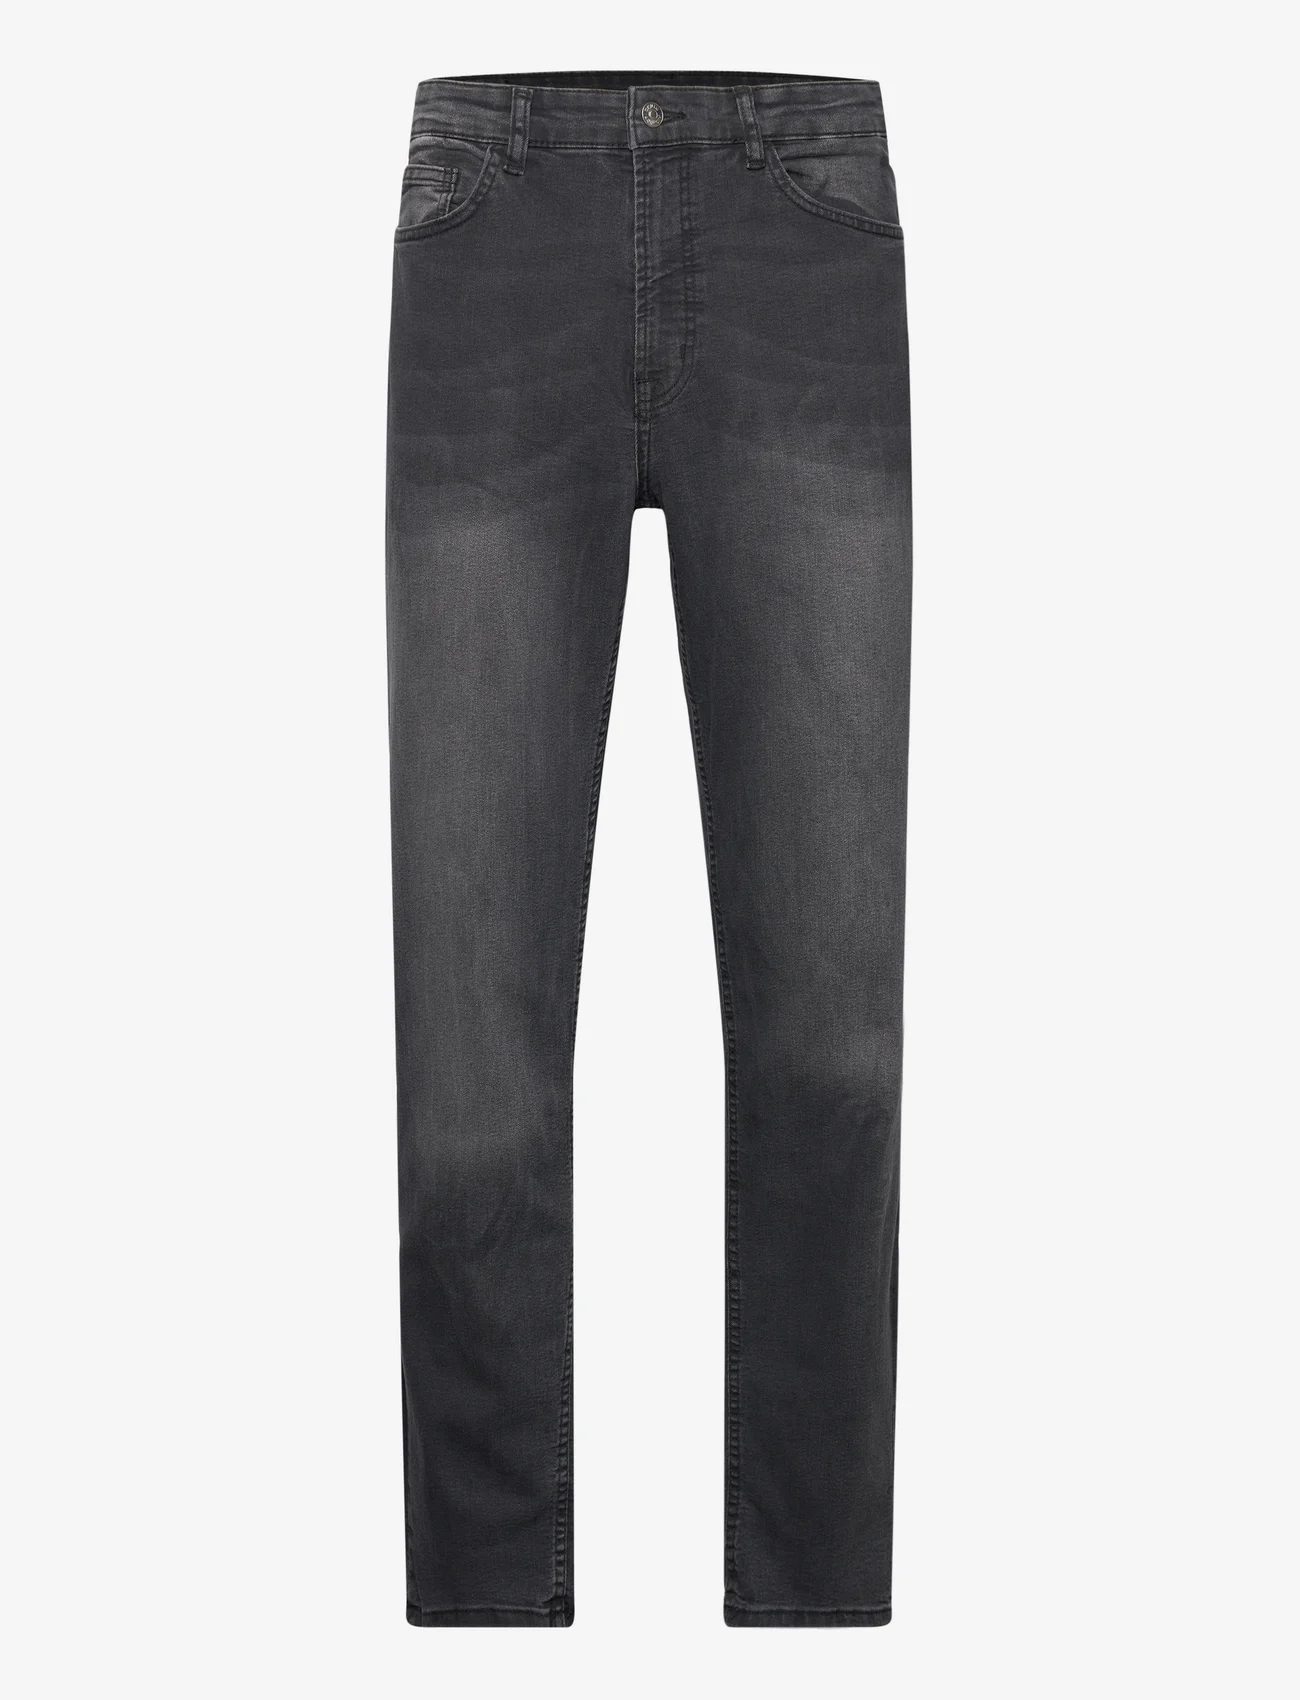 Denim project - DPRECYCLED CARROT JEANS - tapered jeans - black stone wash - 0